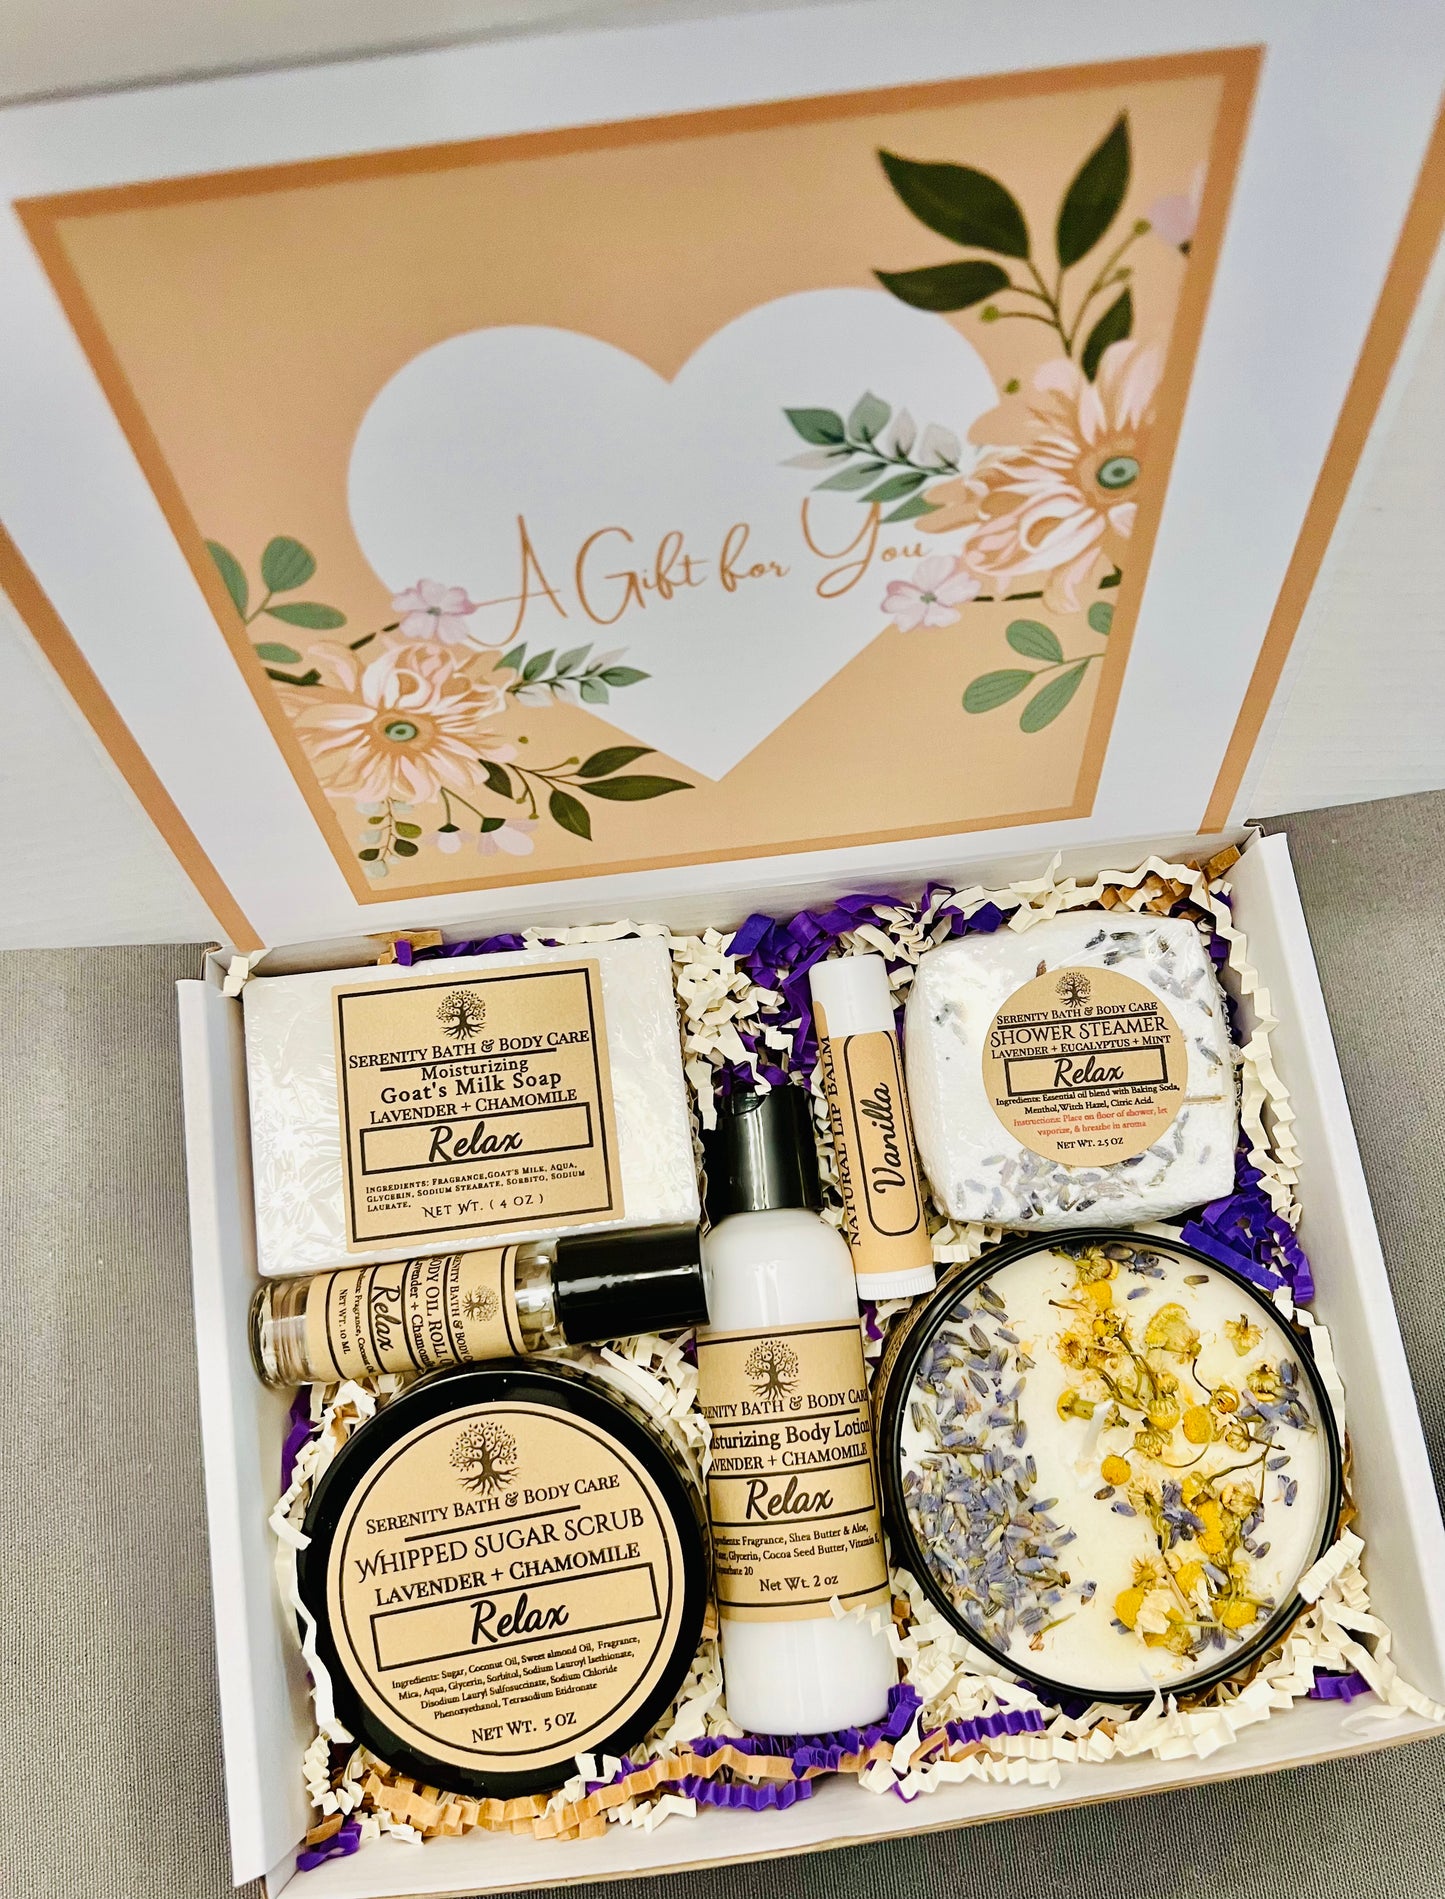 A Gift For Her| Bath and Body Spa Gift Set| Luxury Gift Basket| Self Care Gift Box for Women| Gifts for Mom| Birthday Gifts for Her